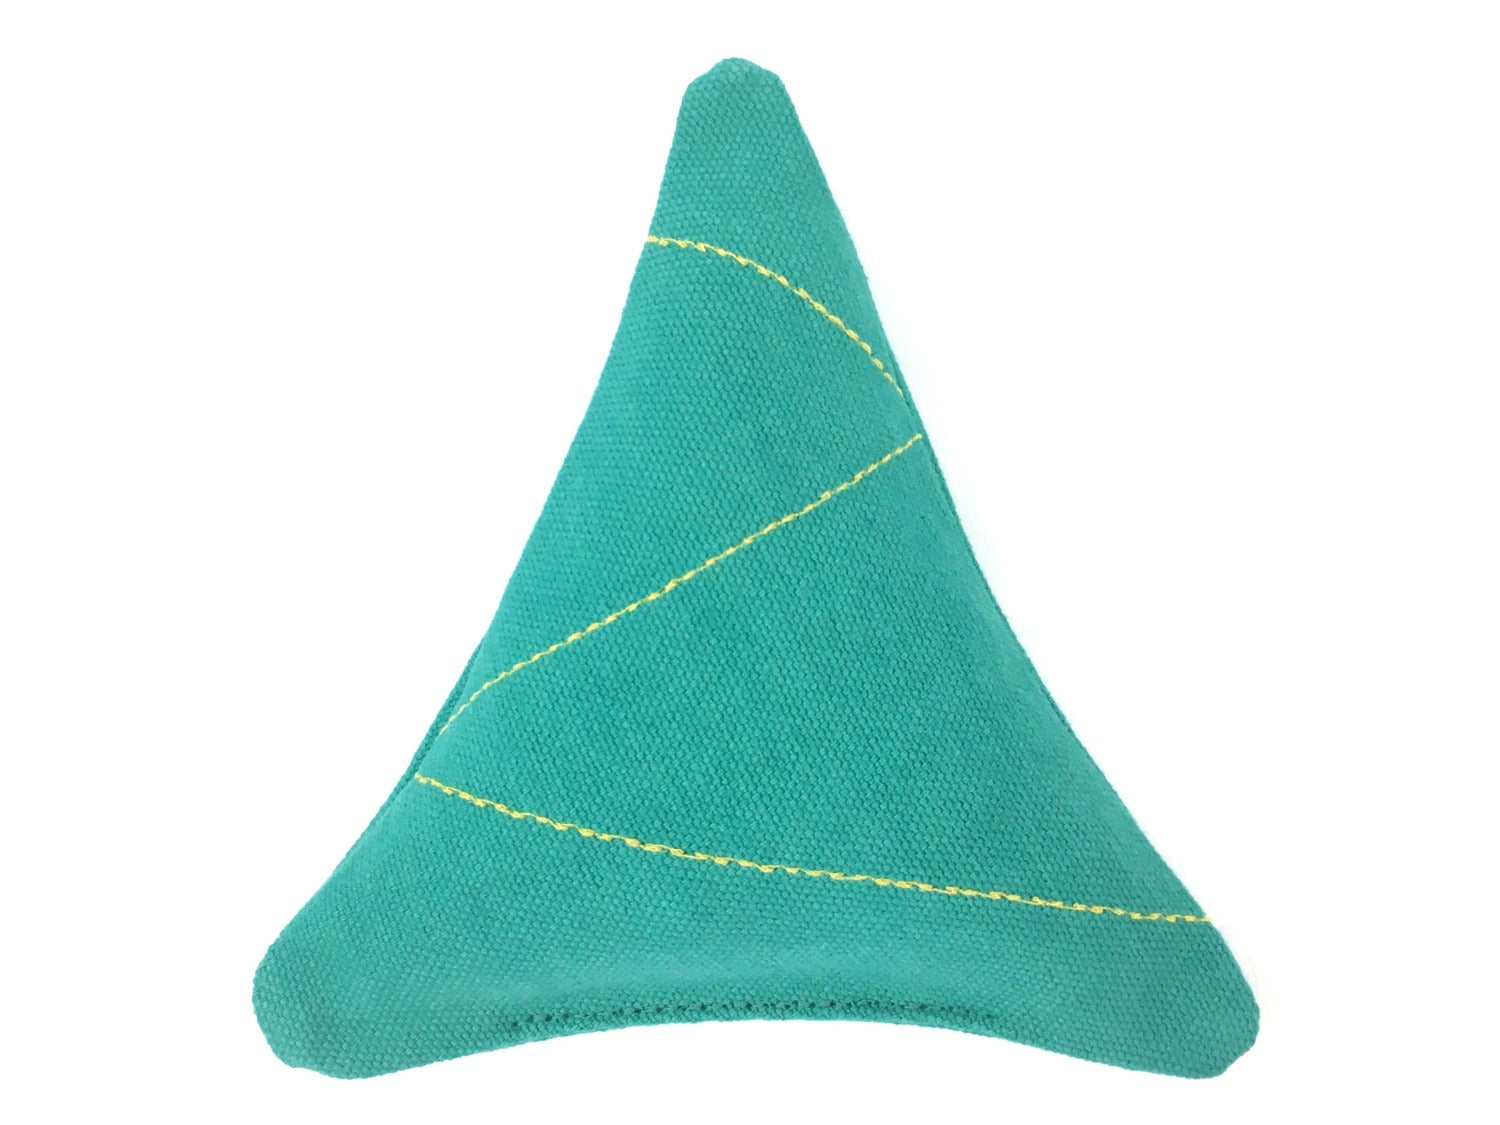 Christmas tree dog toy made from emerald green organic cotton canvas and recycled polyester filling. Made in the UK.